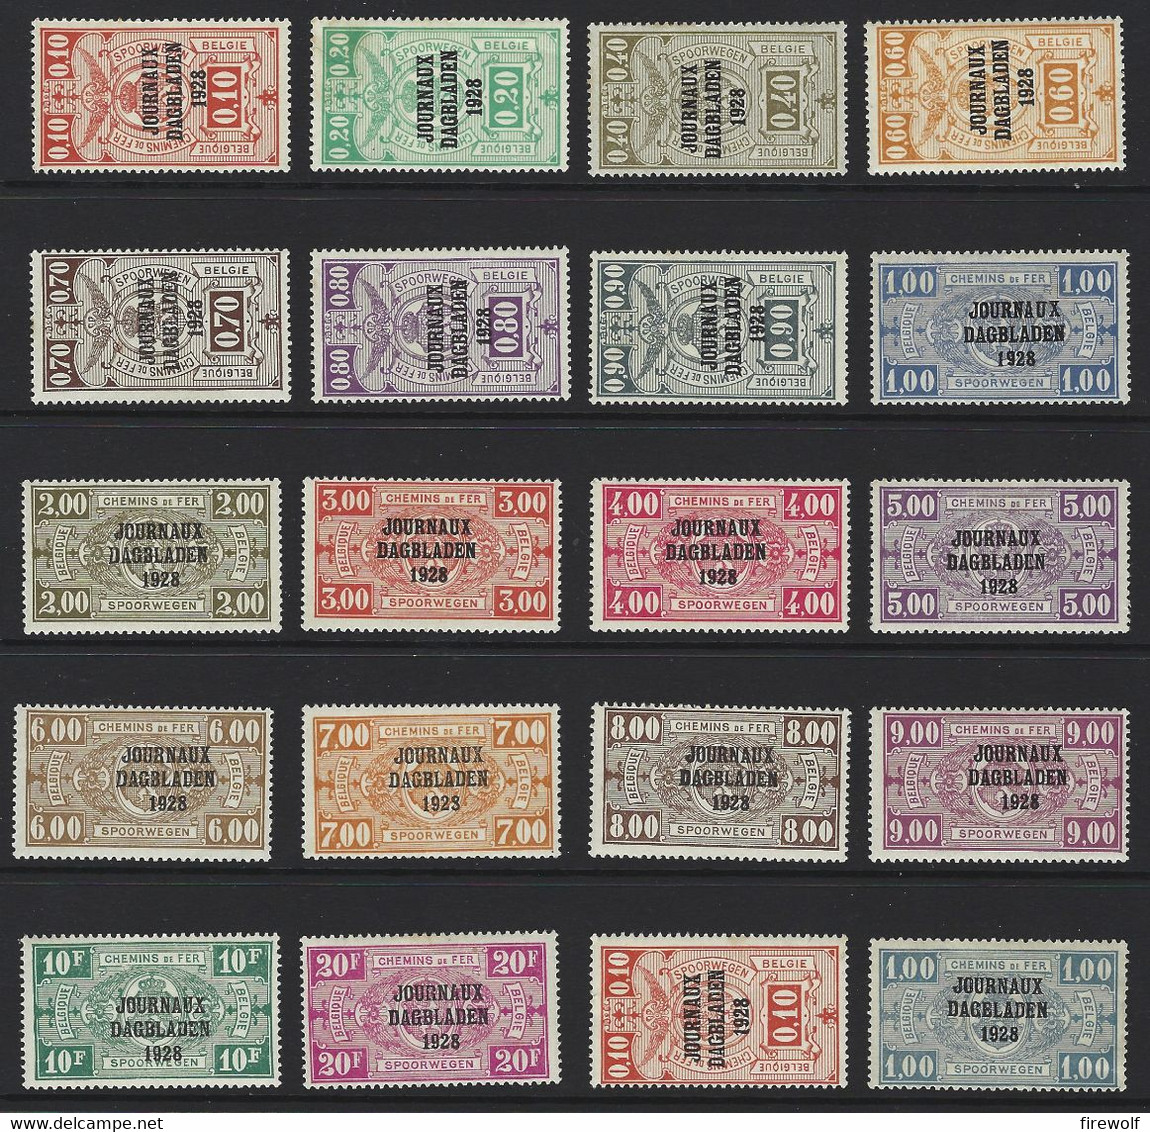 A13 - Belgium - 1928 - Railways Parcel Stamps With Surcharge Journaux Dagbladen 1928 - Mix MH/MNH - Giornali [JO]